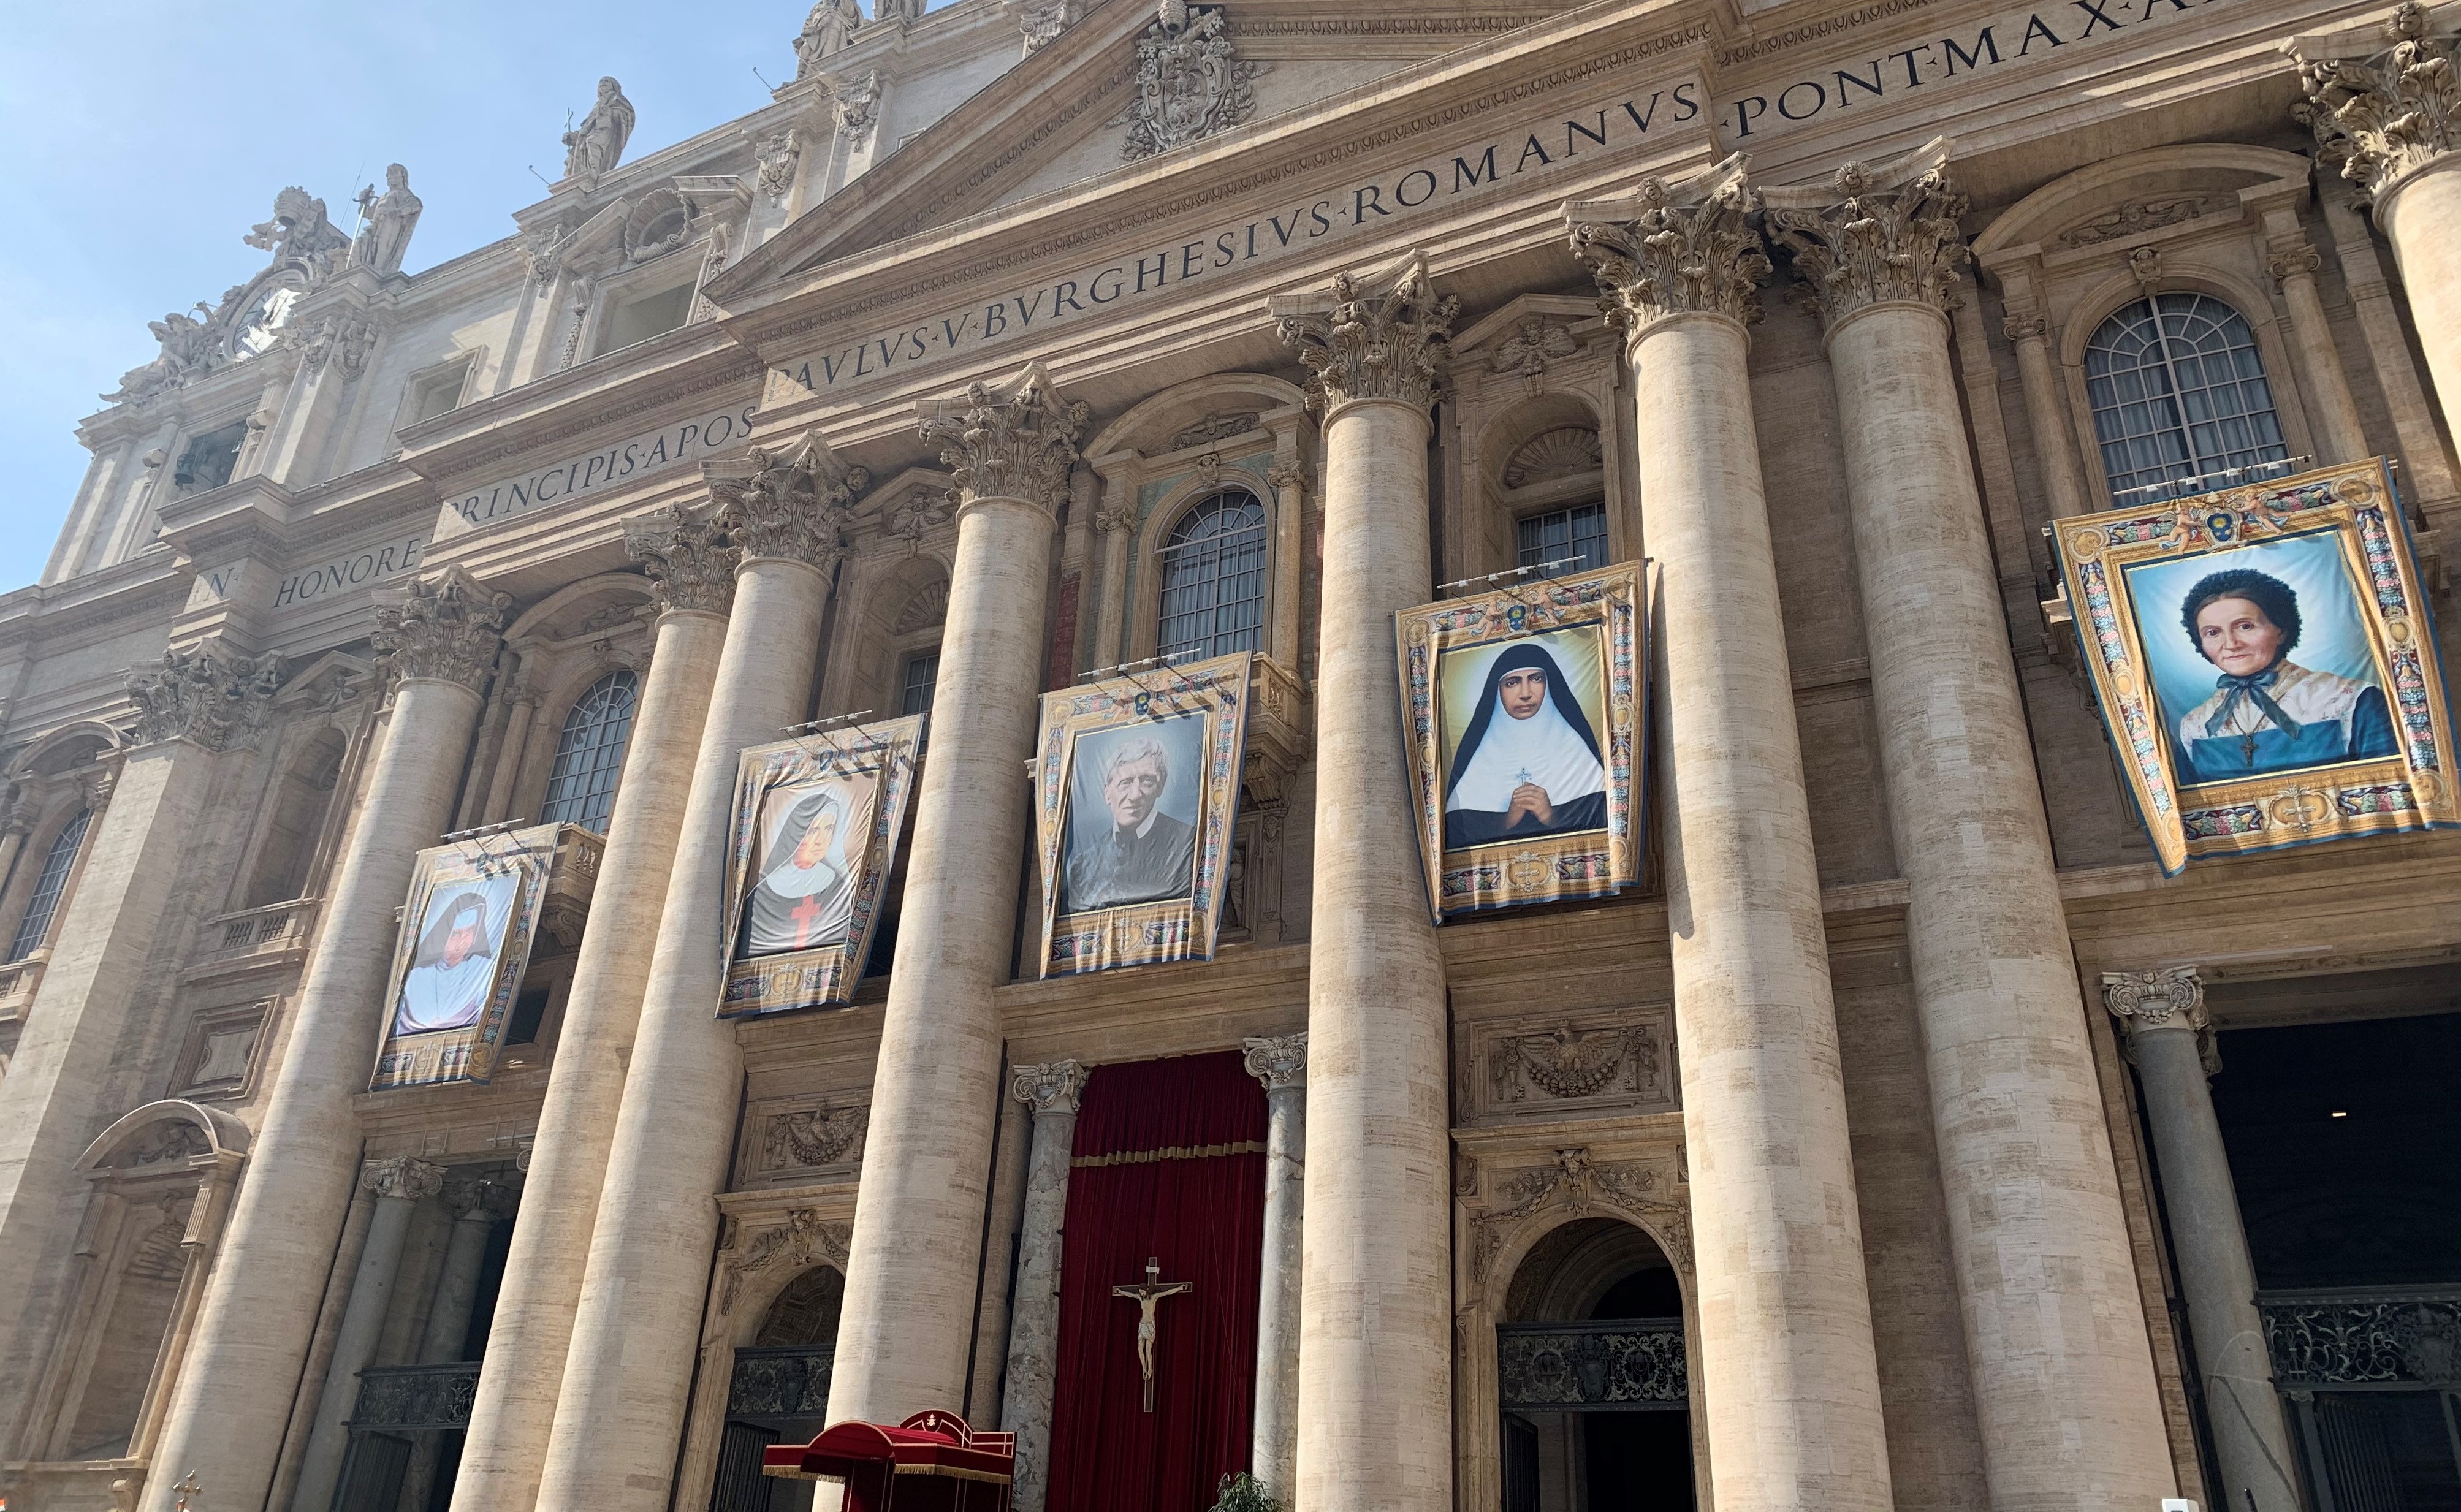 A picture of Cardinal Newman hangs outside St Peter's Basilica in Rome.